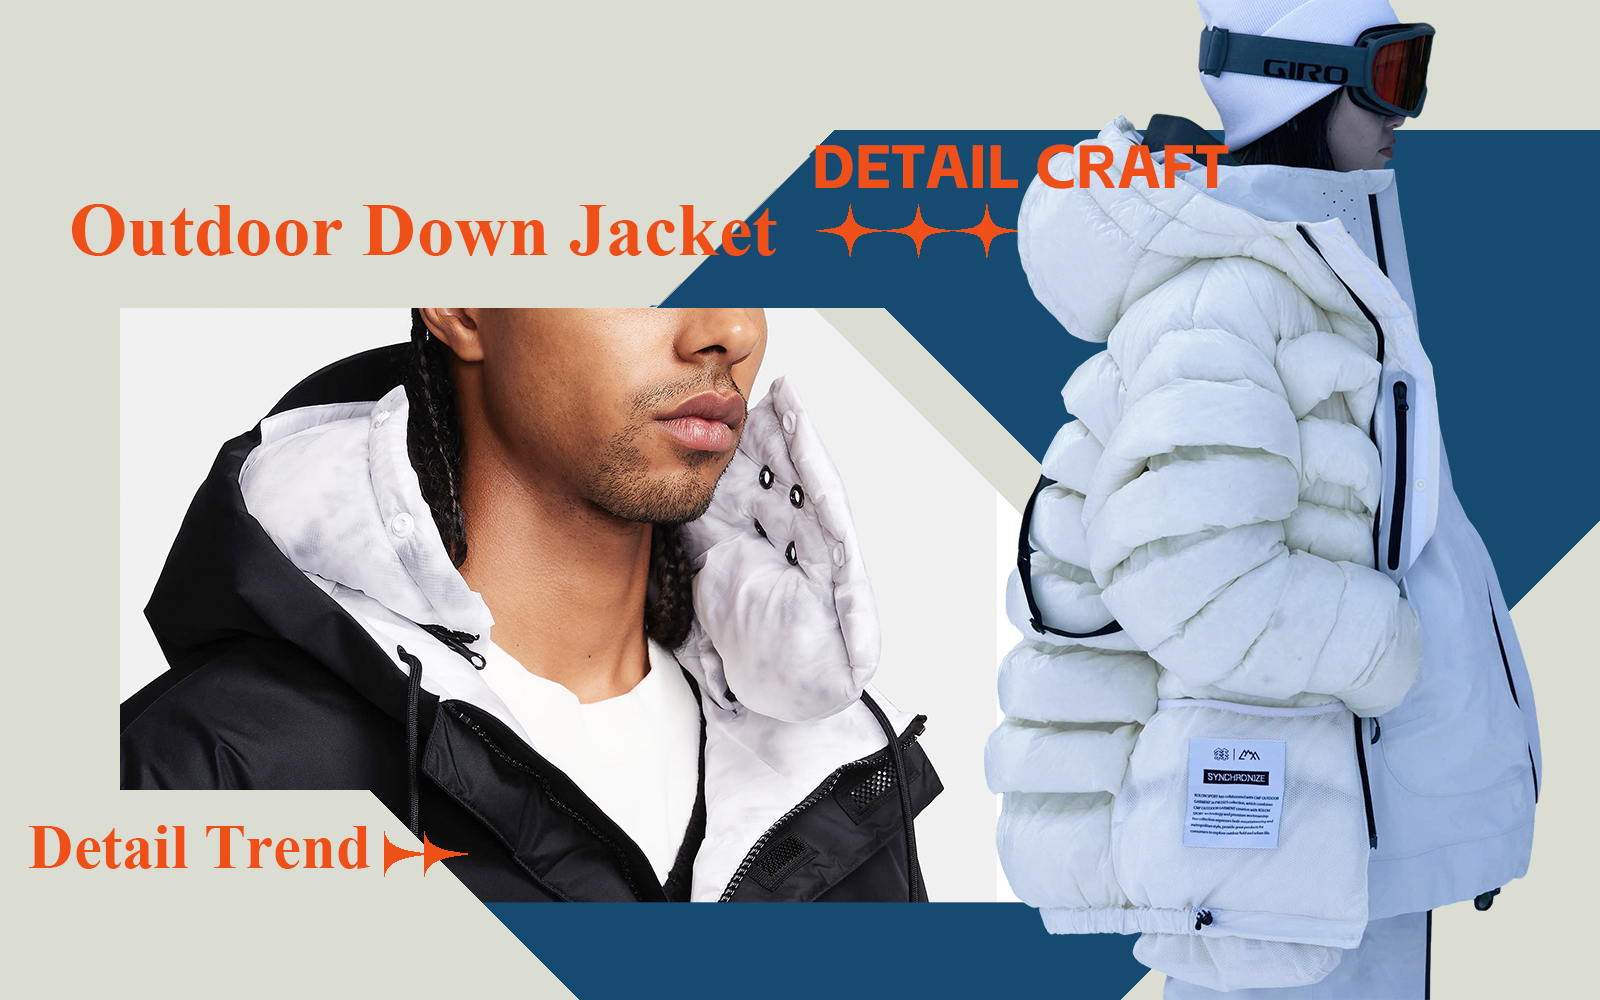 Functional Aesthetics -- The Detail & Craft Trend for Down Jacket